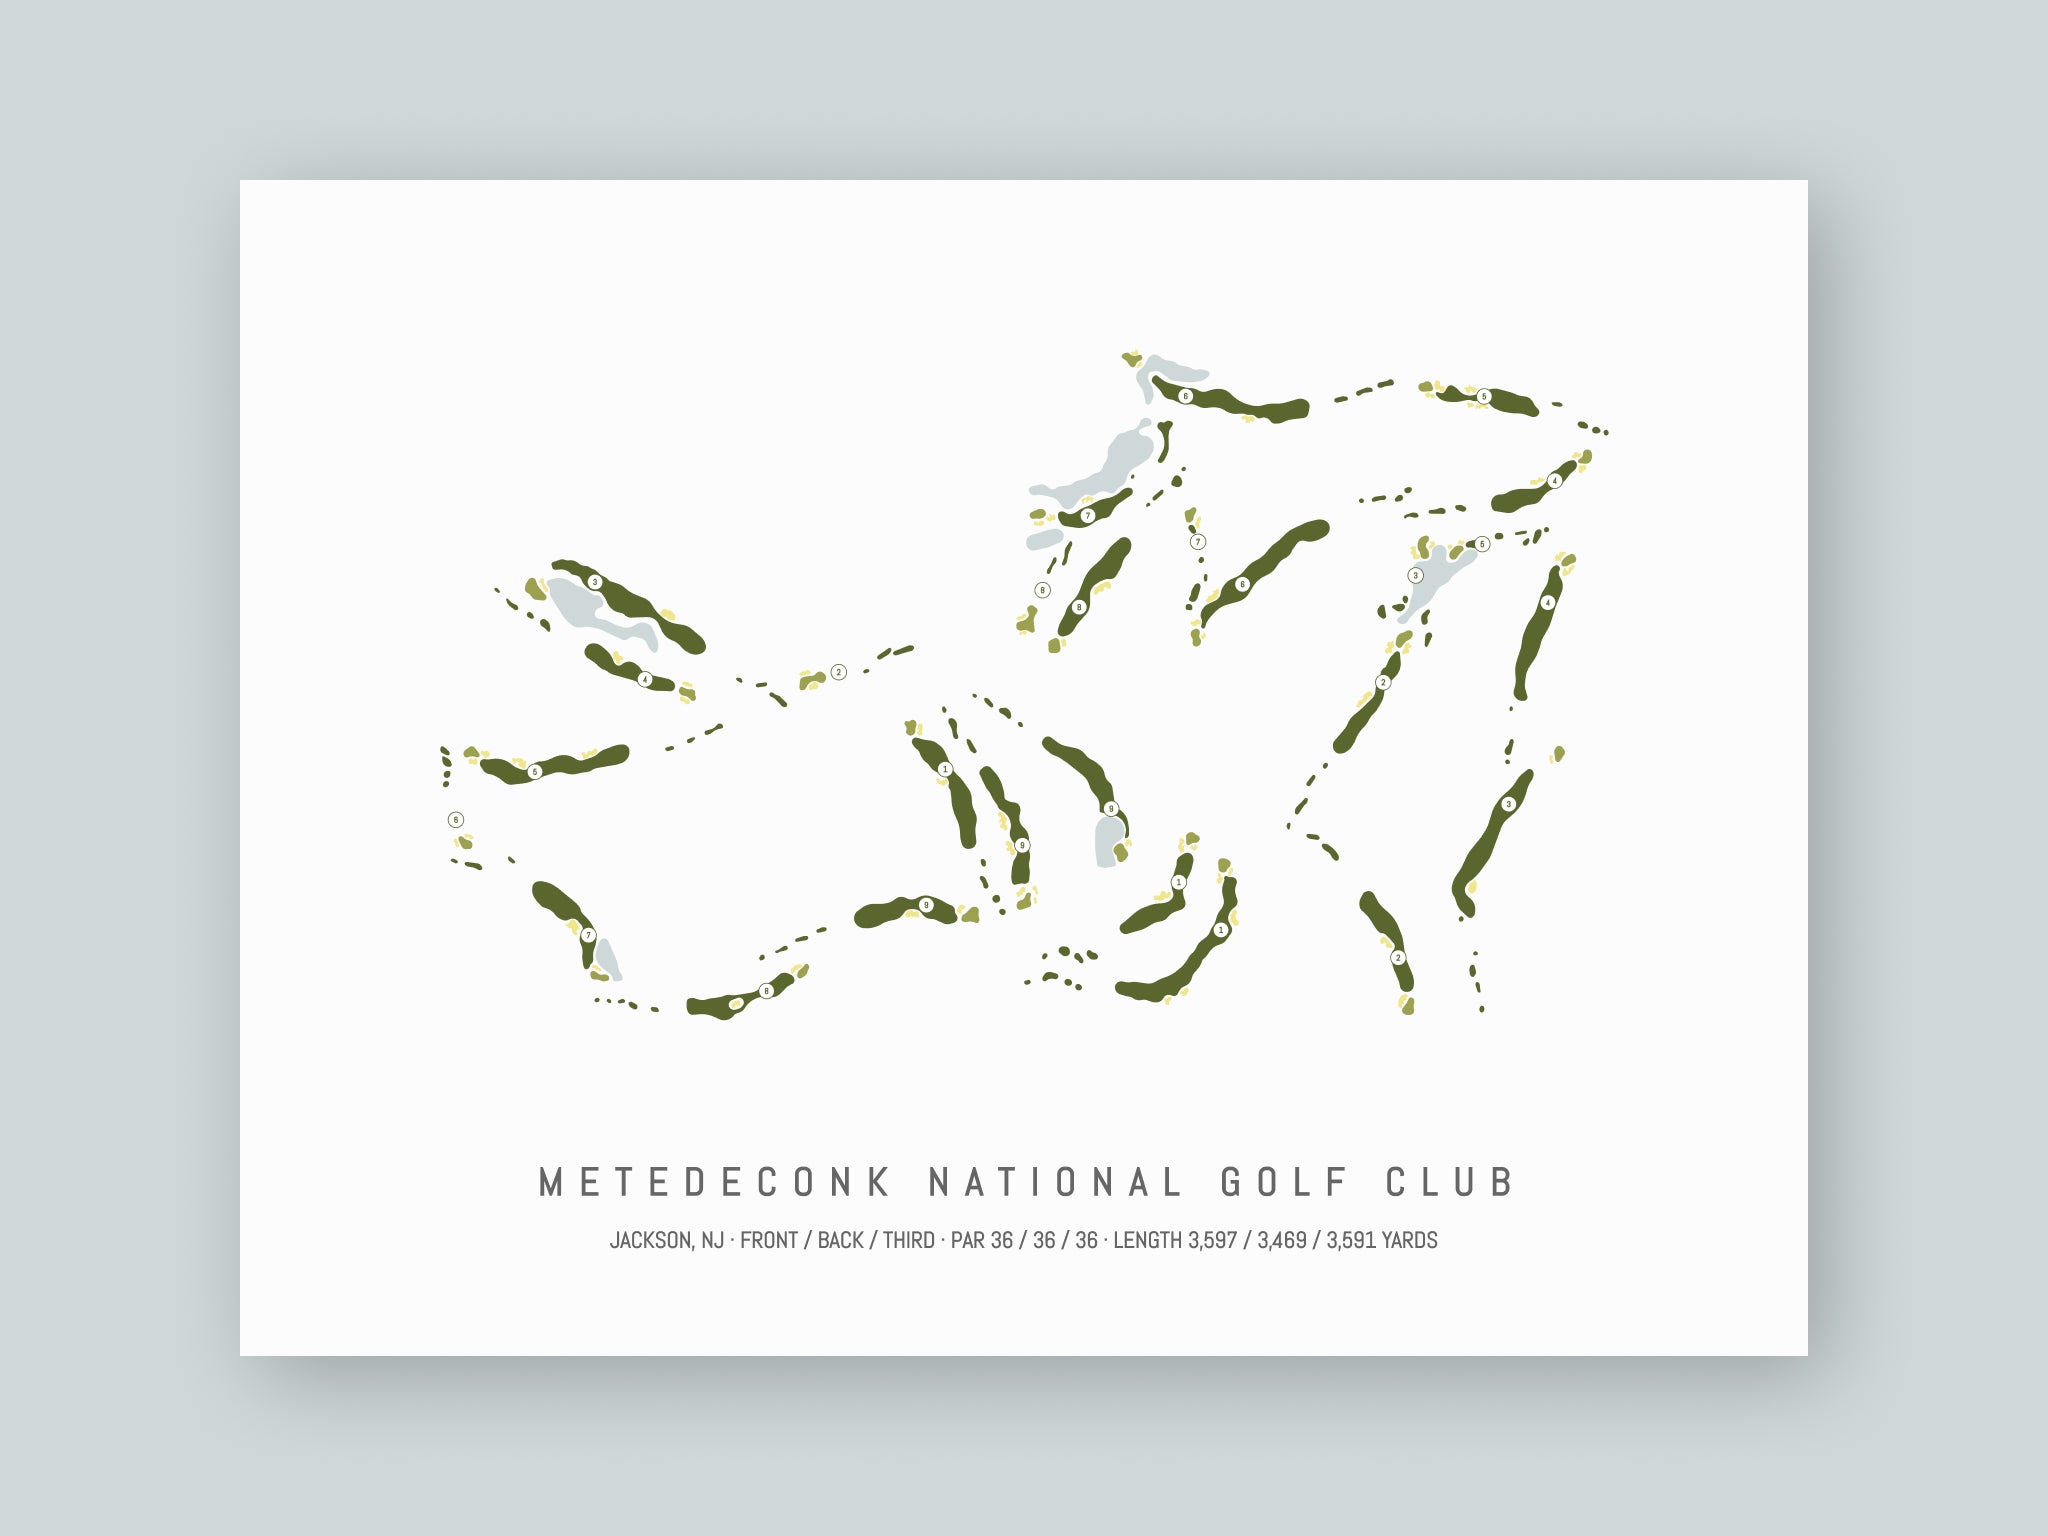 Metedeconk-National-Golf-Club-NJ--Unframed-24x18-With-Hole-Numbers